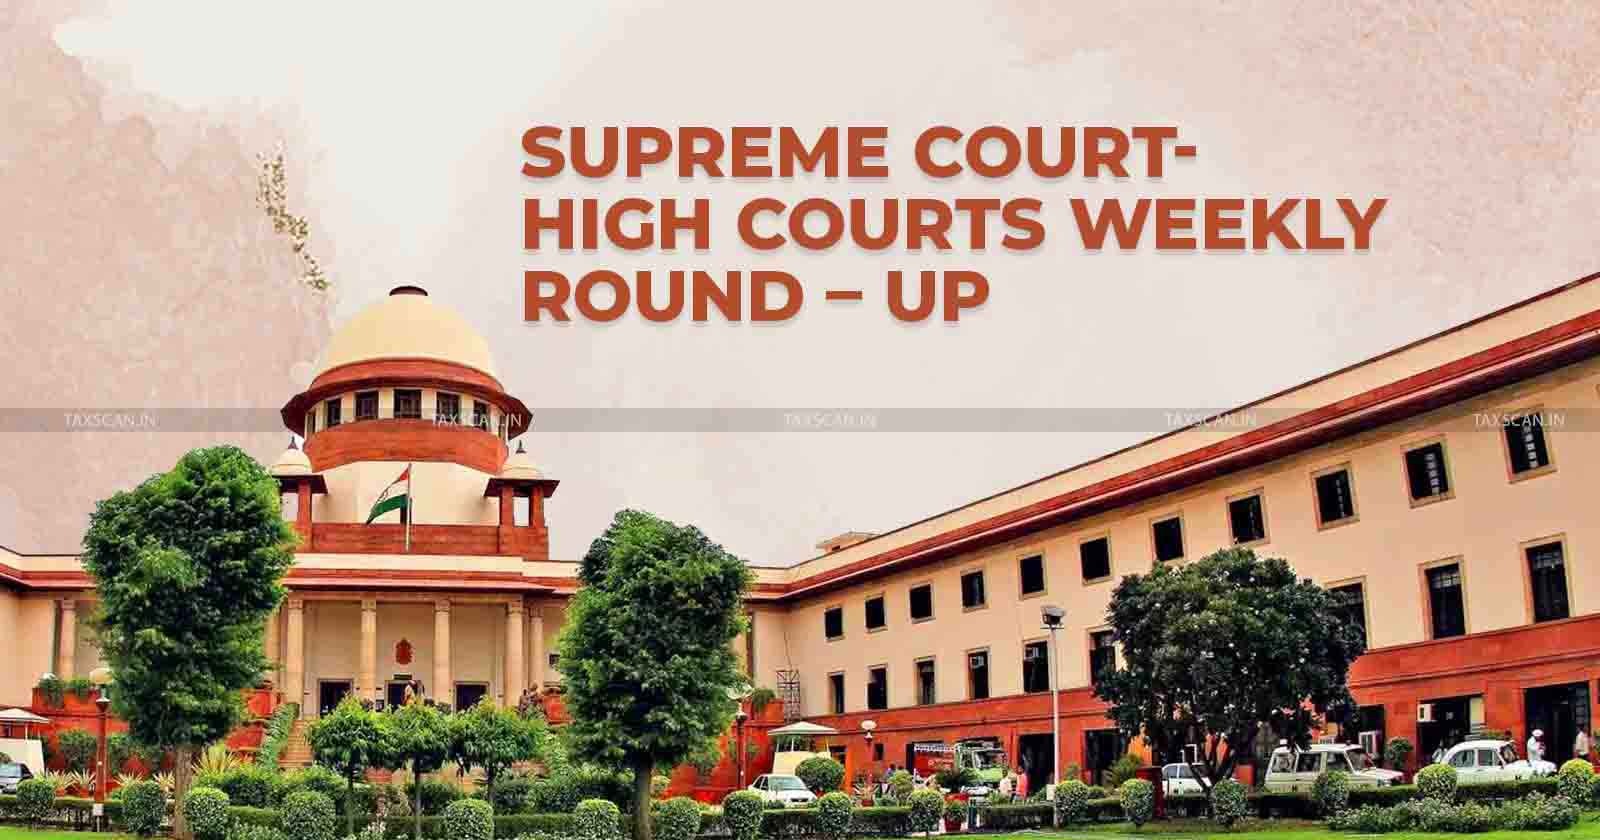 Supreme court - High courts in india - Weekly round up - Supreme Court updates - High Court news - taxscan